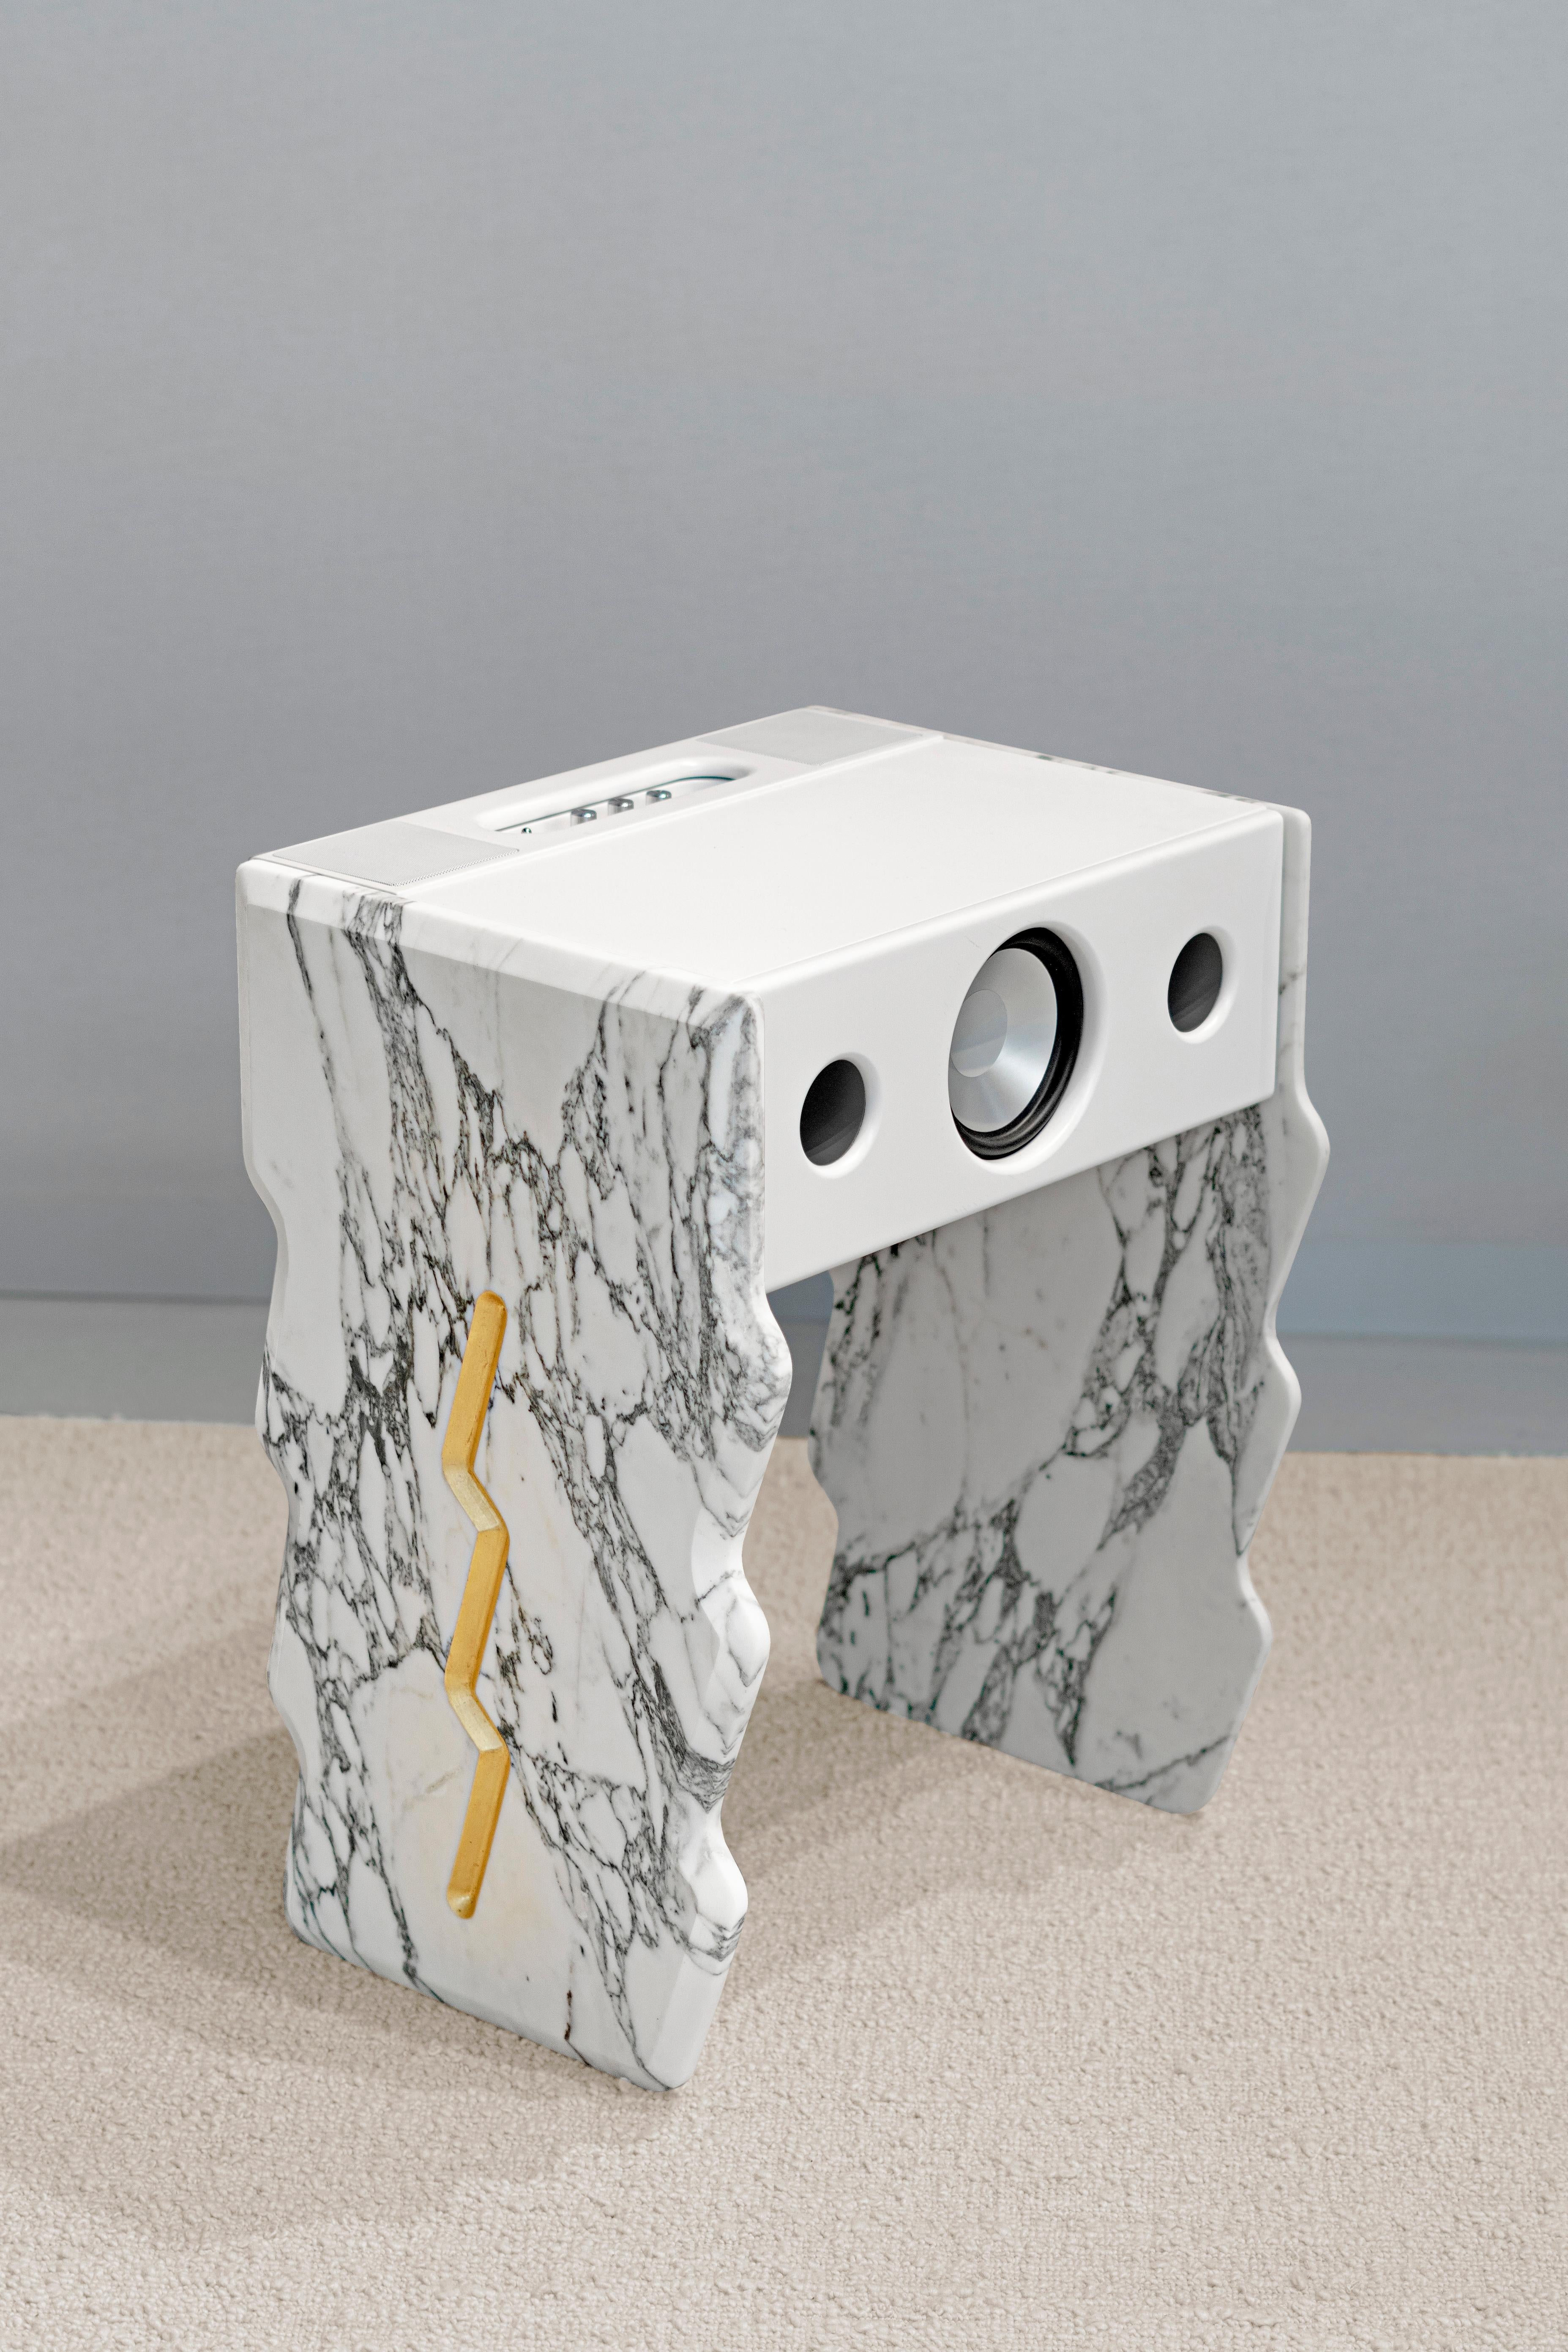 High Cube Thunder Acoustic Furniture by SB26
Dimensions: W 38 x D 48 x H 62 cm
Materials: St Laurent & Arabescato marble legs, leaf gilding, leather.
Weight 30 kg.

Based on the Cube (acoustic speaker cabinet designed by Samuel for la Boite